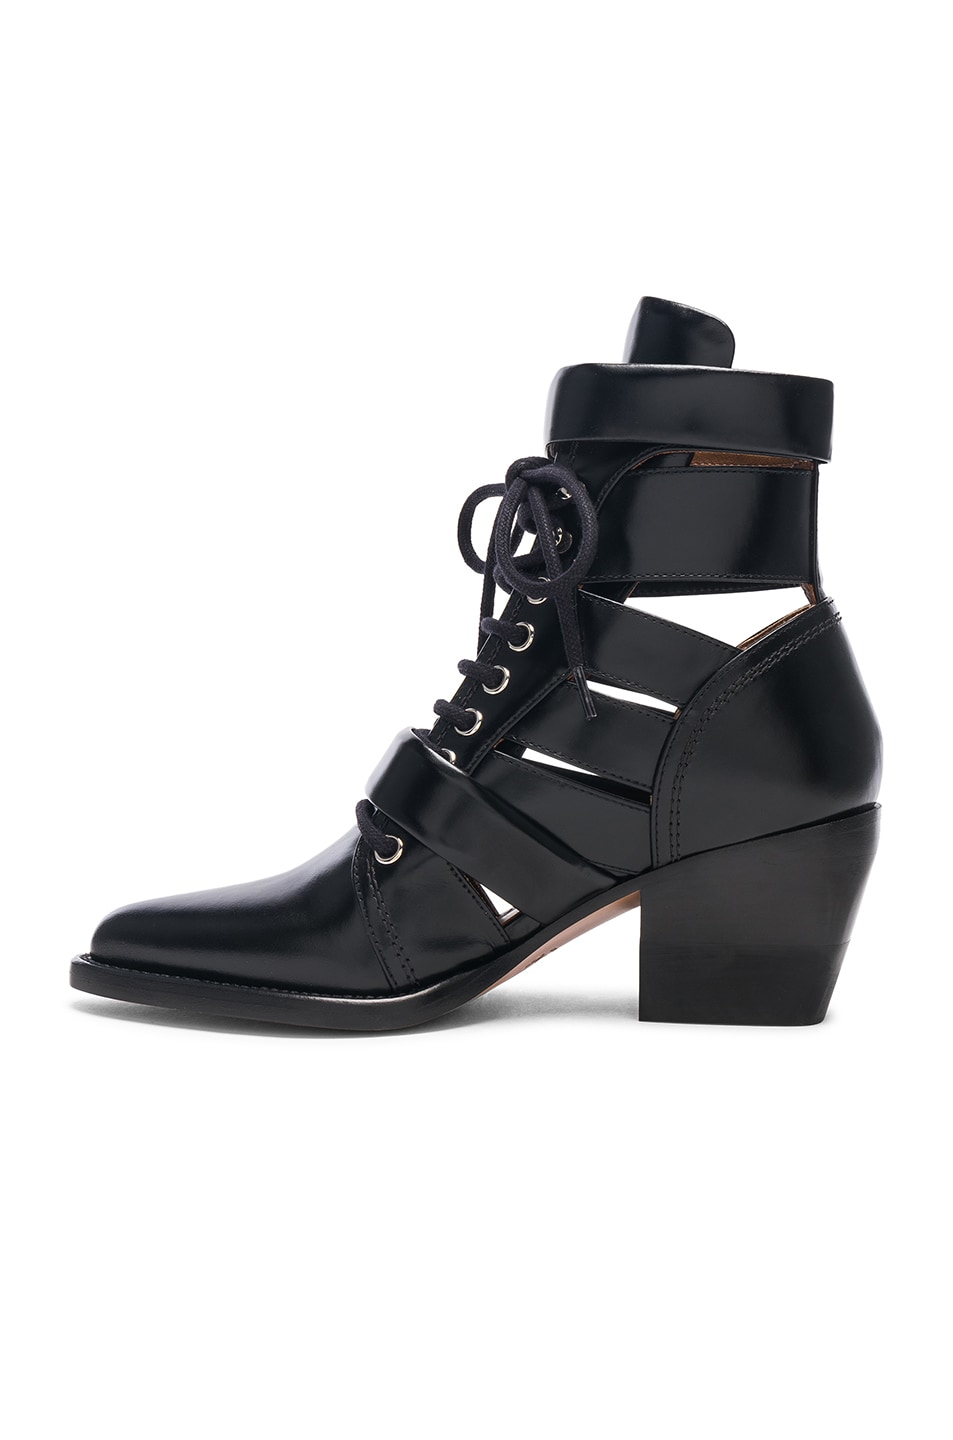 Chloe Rylee Leather Lace Up Buckle Boots in Black | FWRD